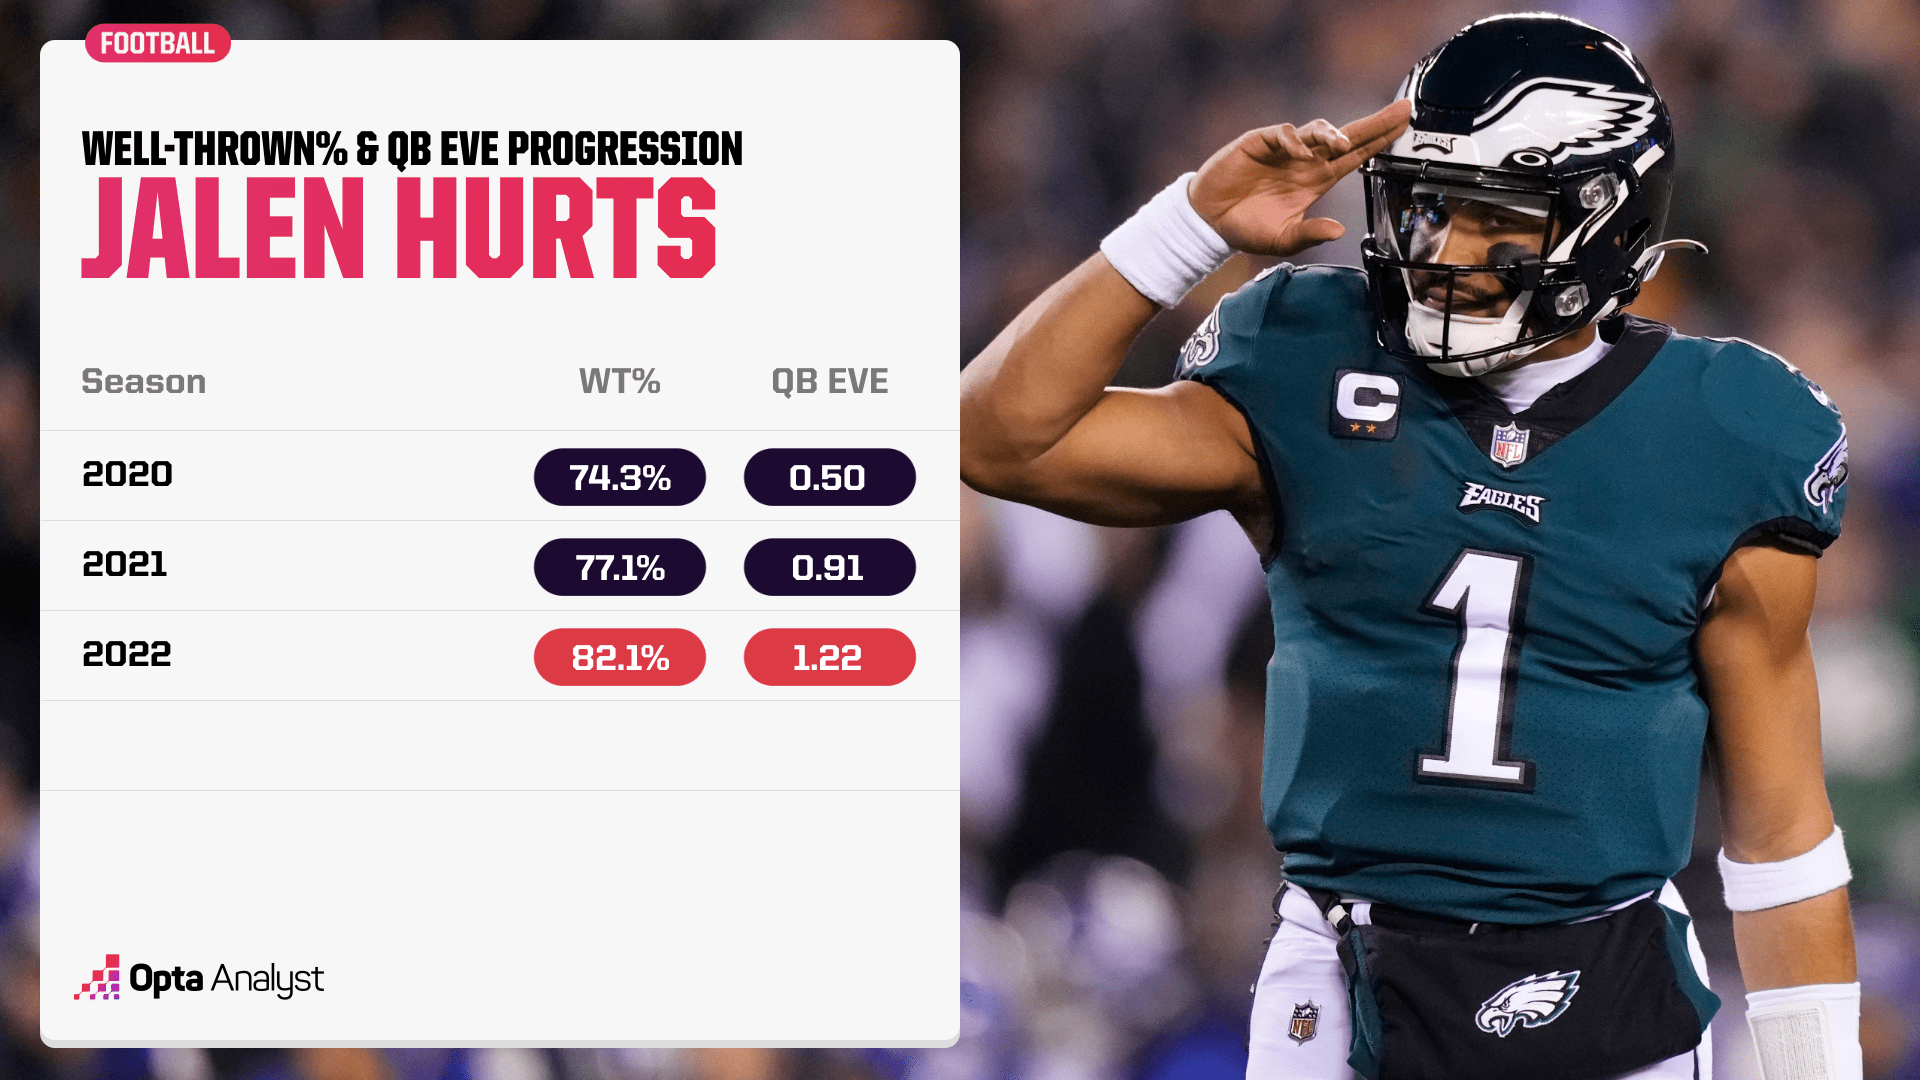 Jalen Hurts well-thrown percentage and QB EVE